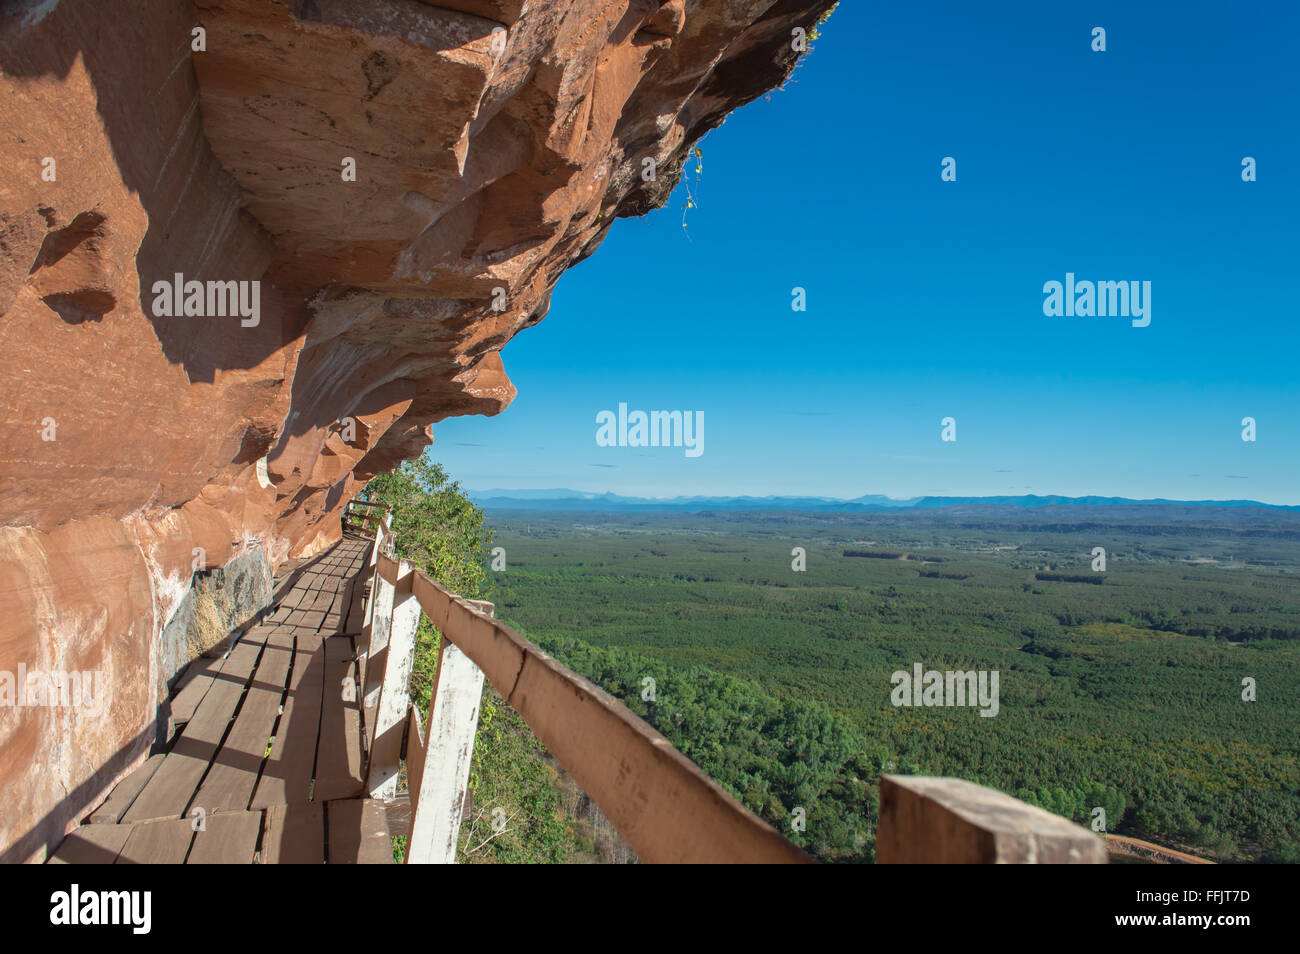 Phu Thok in Thailand. Wooden ladder on the side of the rocky mountains. Stock Photo